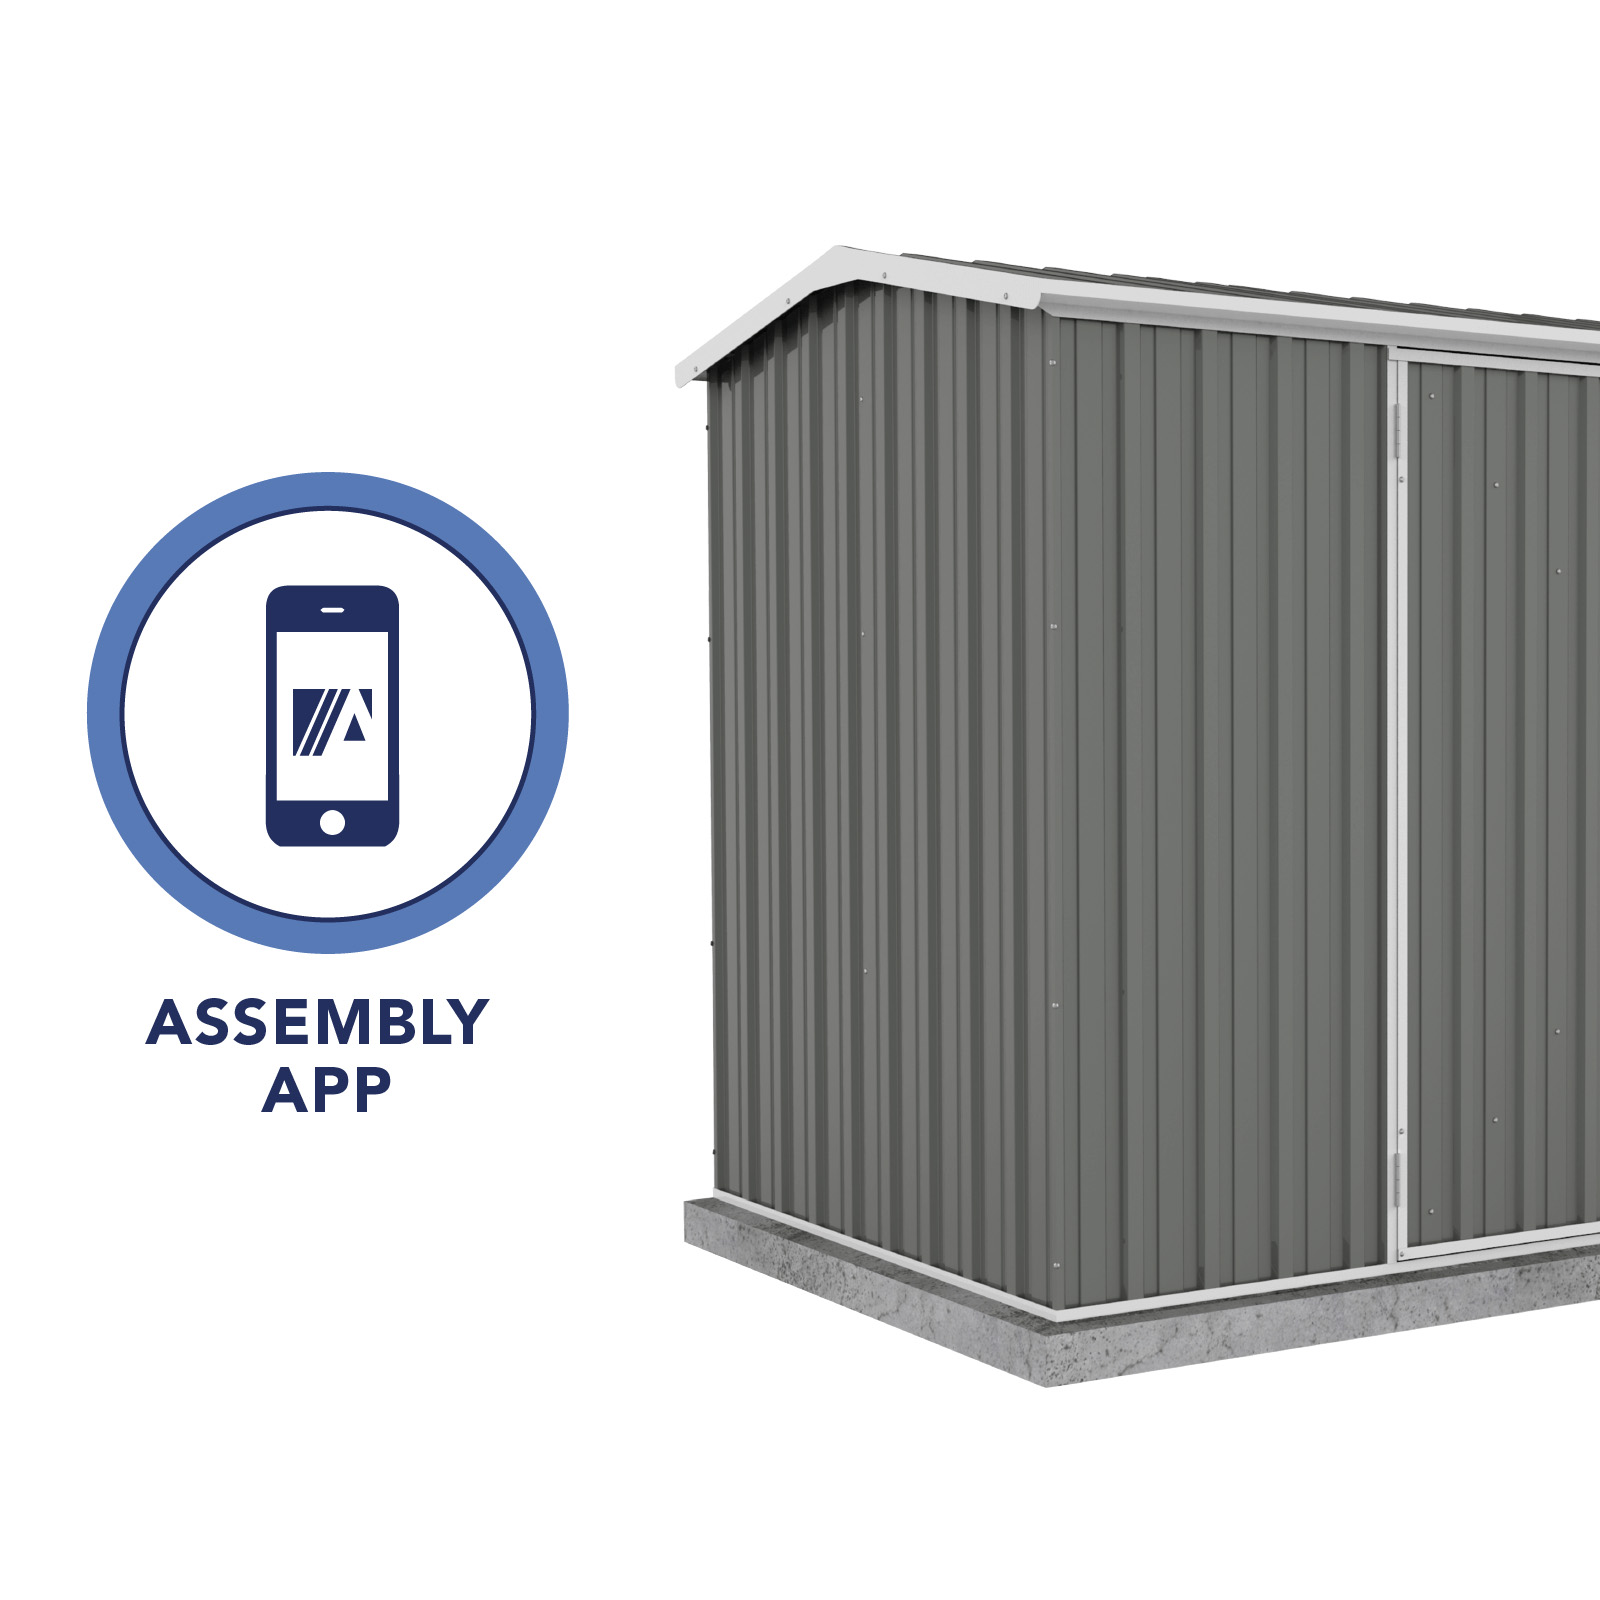 Absco Shed Premier 10 x 5 ft. Galvanized Steel and Metal Storage Shed, Gray - image 3 of 11